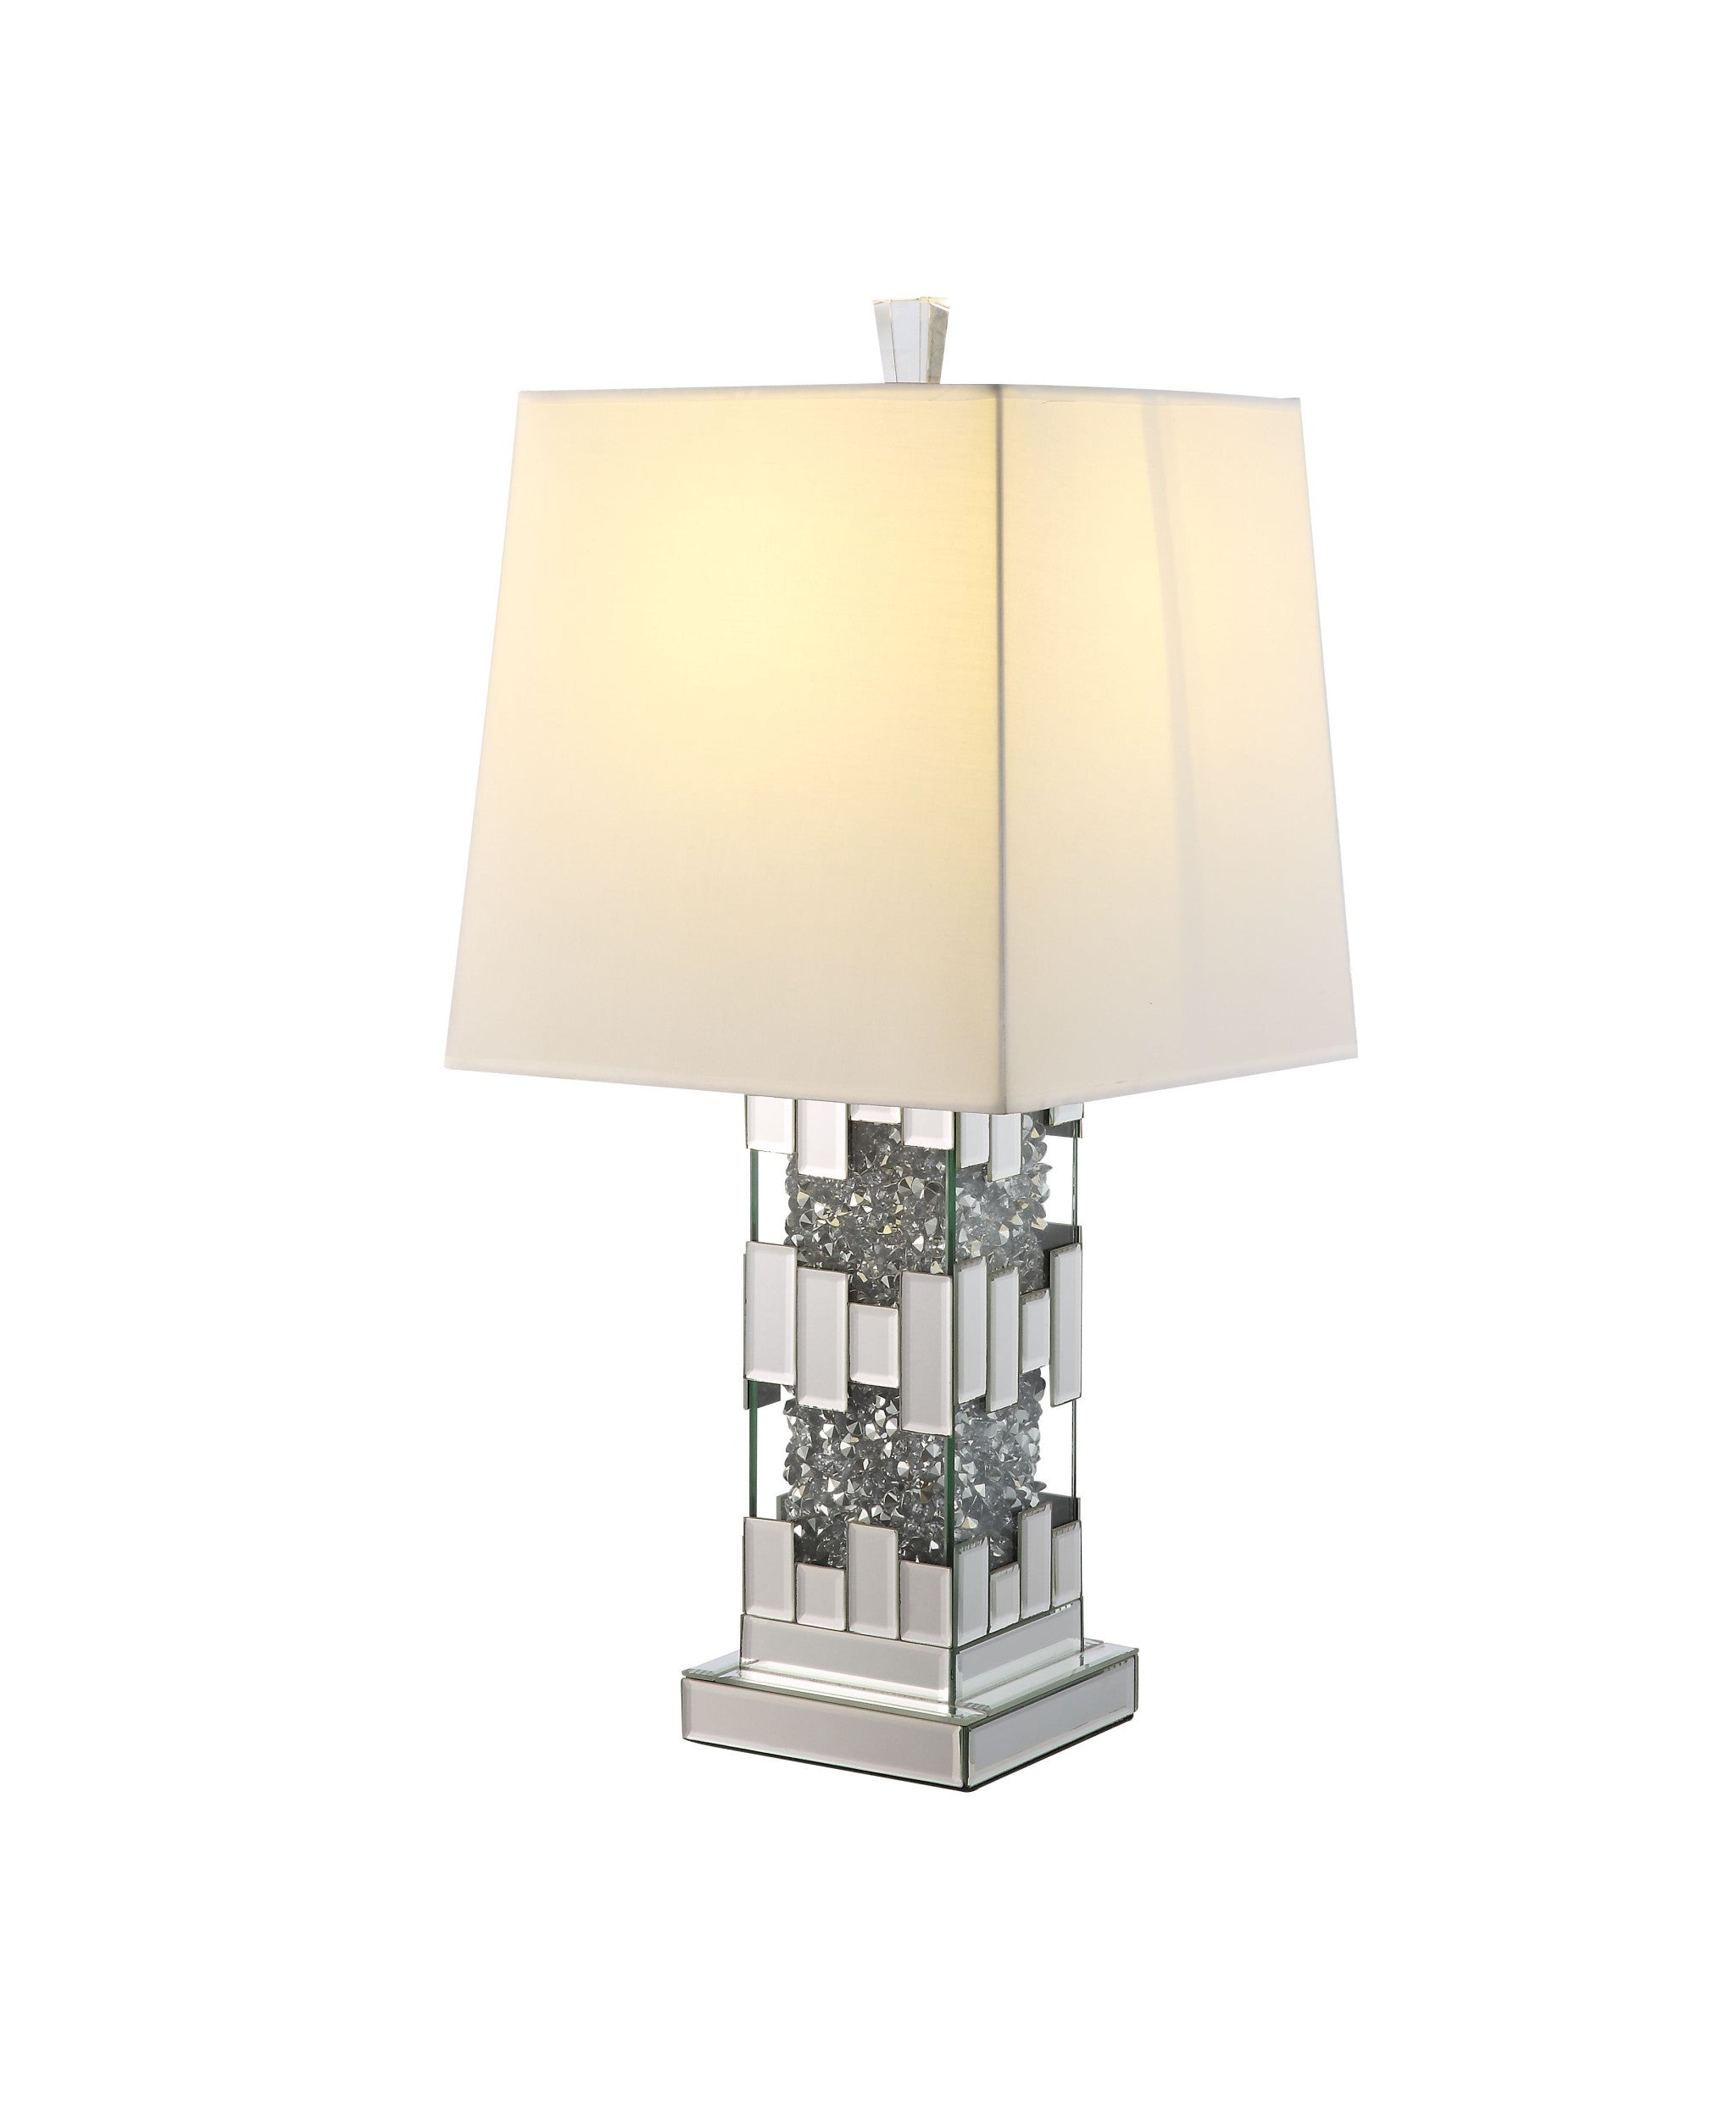 30" Mirrored Glass and Faux Crystal Geo Table Lamp With White Square Shade